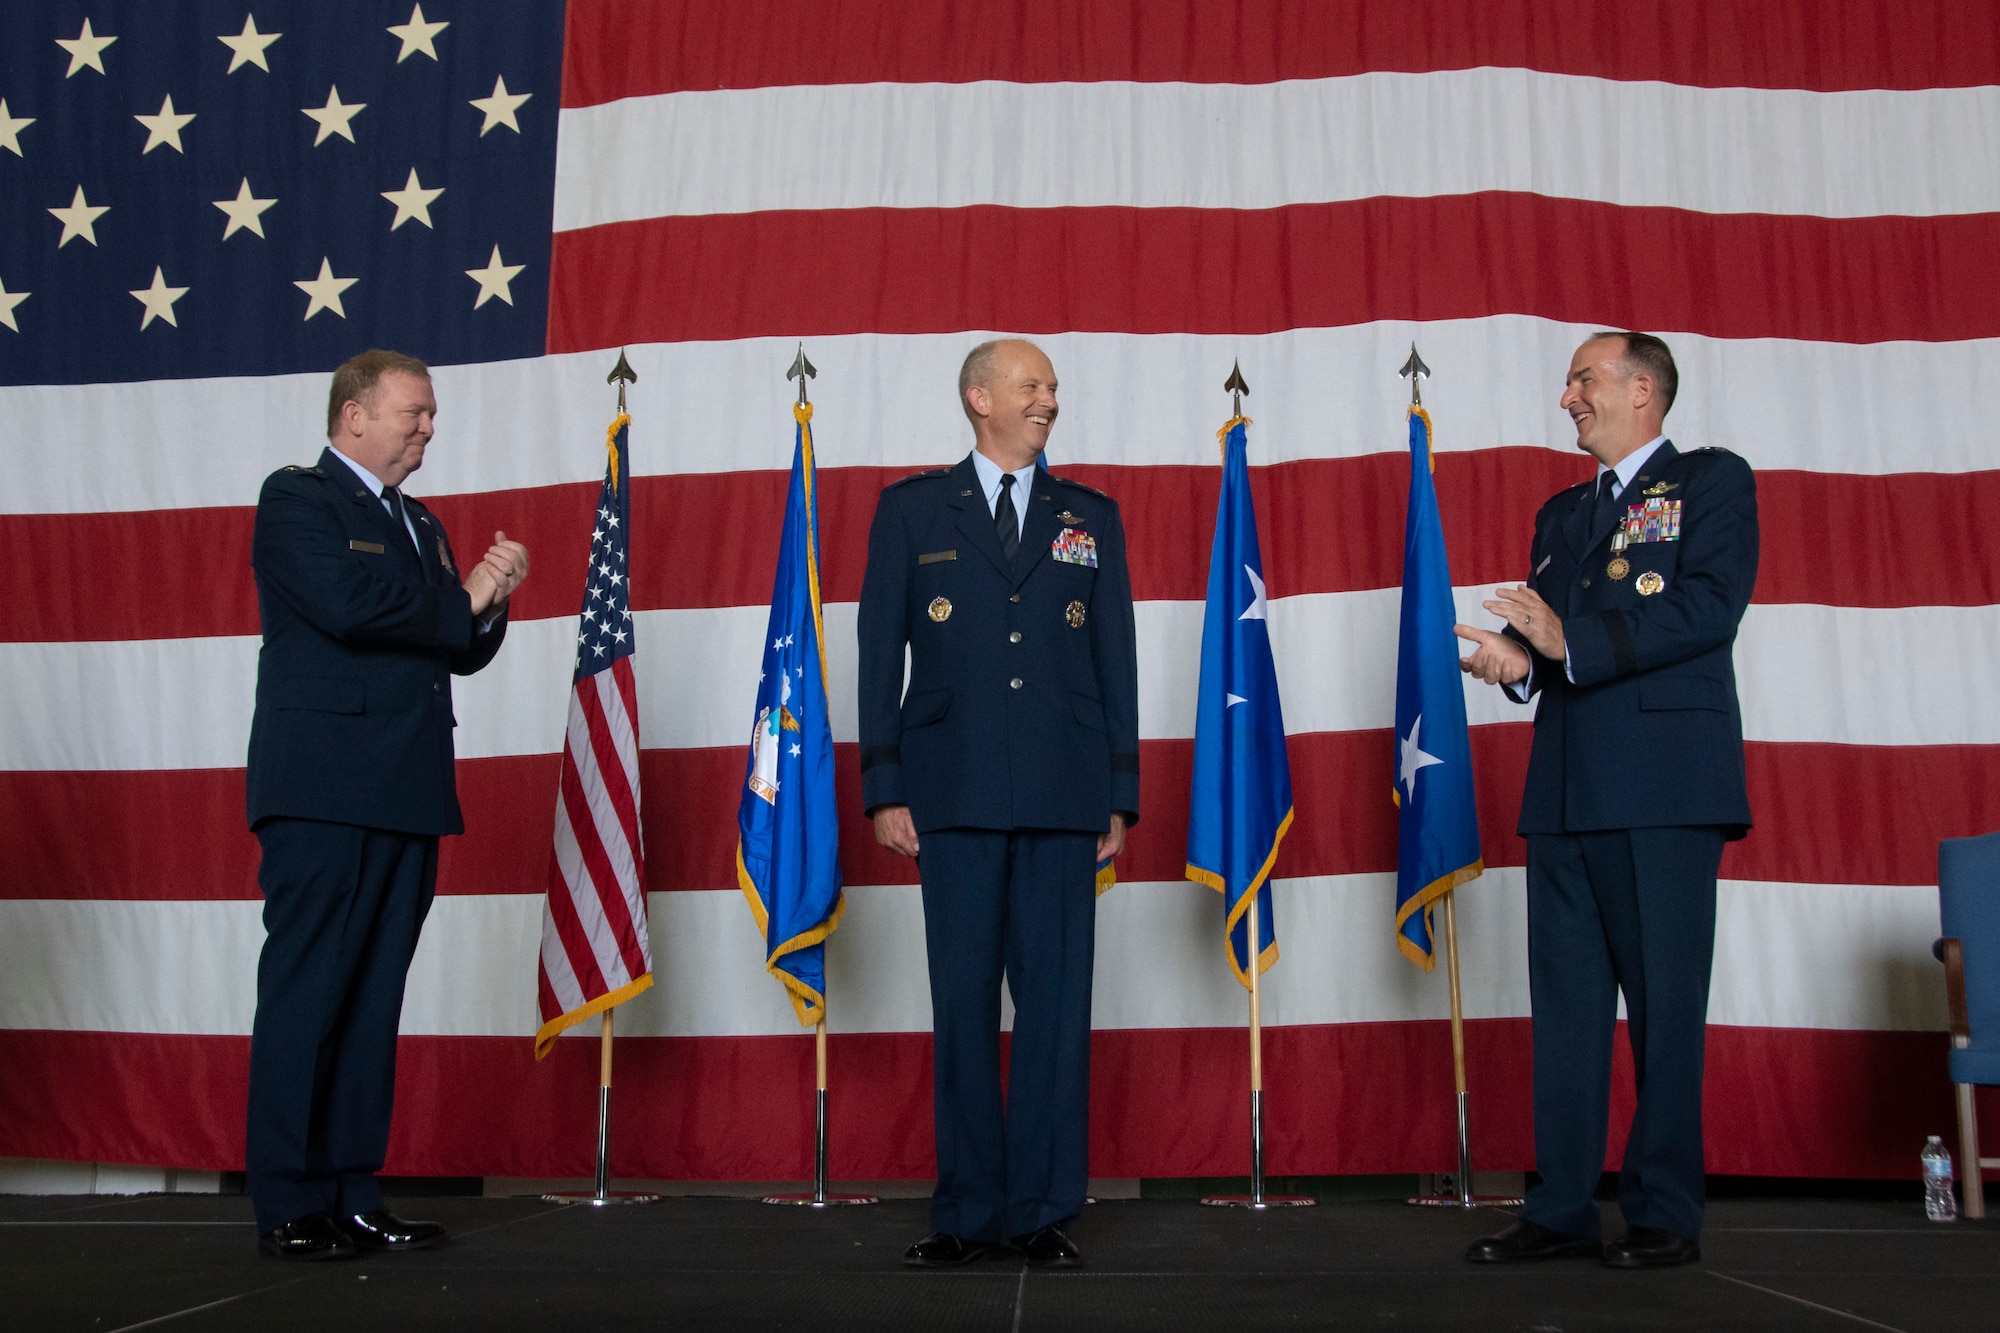 Maj. Gen. Brett C. Larson (center) is applauded by Lt. Gen. Ricahrd W. Scobee (left) and Maj. Gen. John P. Healy (right) following the 22nd Air Force change of command ceremony held at Dobbins Air Reserve Base, Georgia, July 10, 2021.
(U.S. Air Force photo by Senior Airman Kendra A. Ransum)